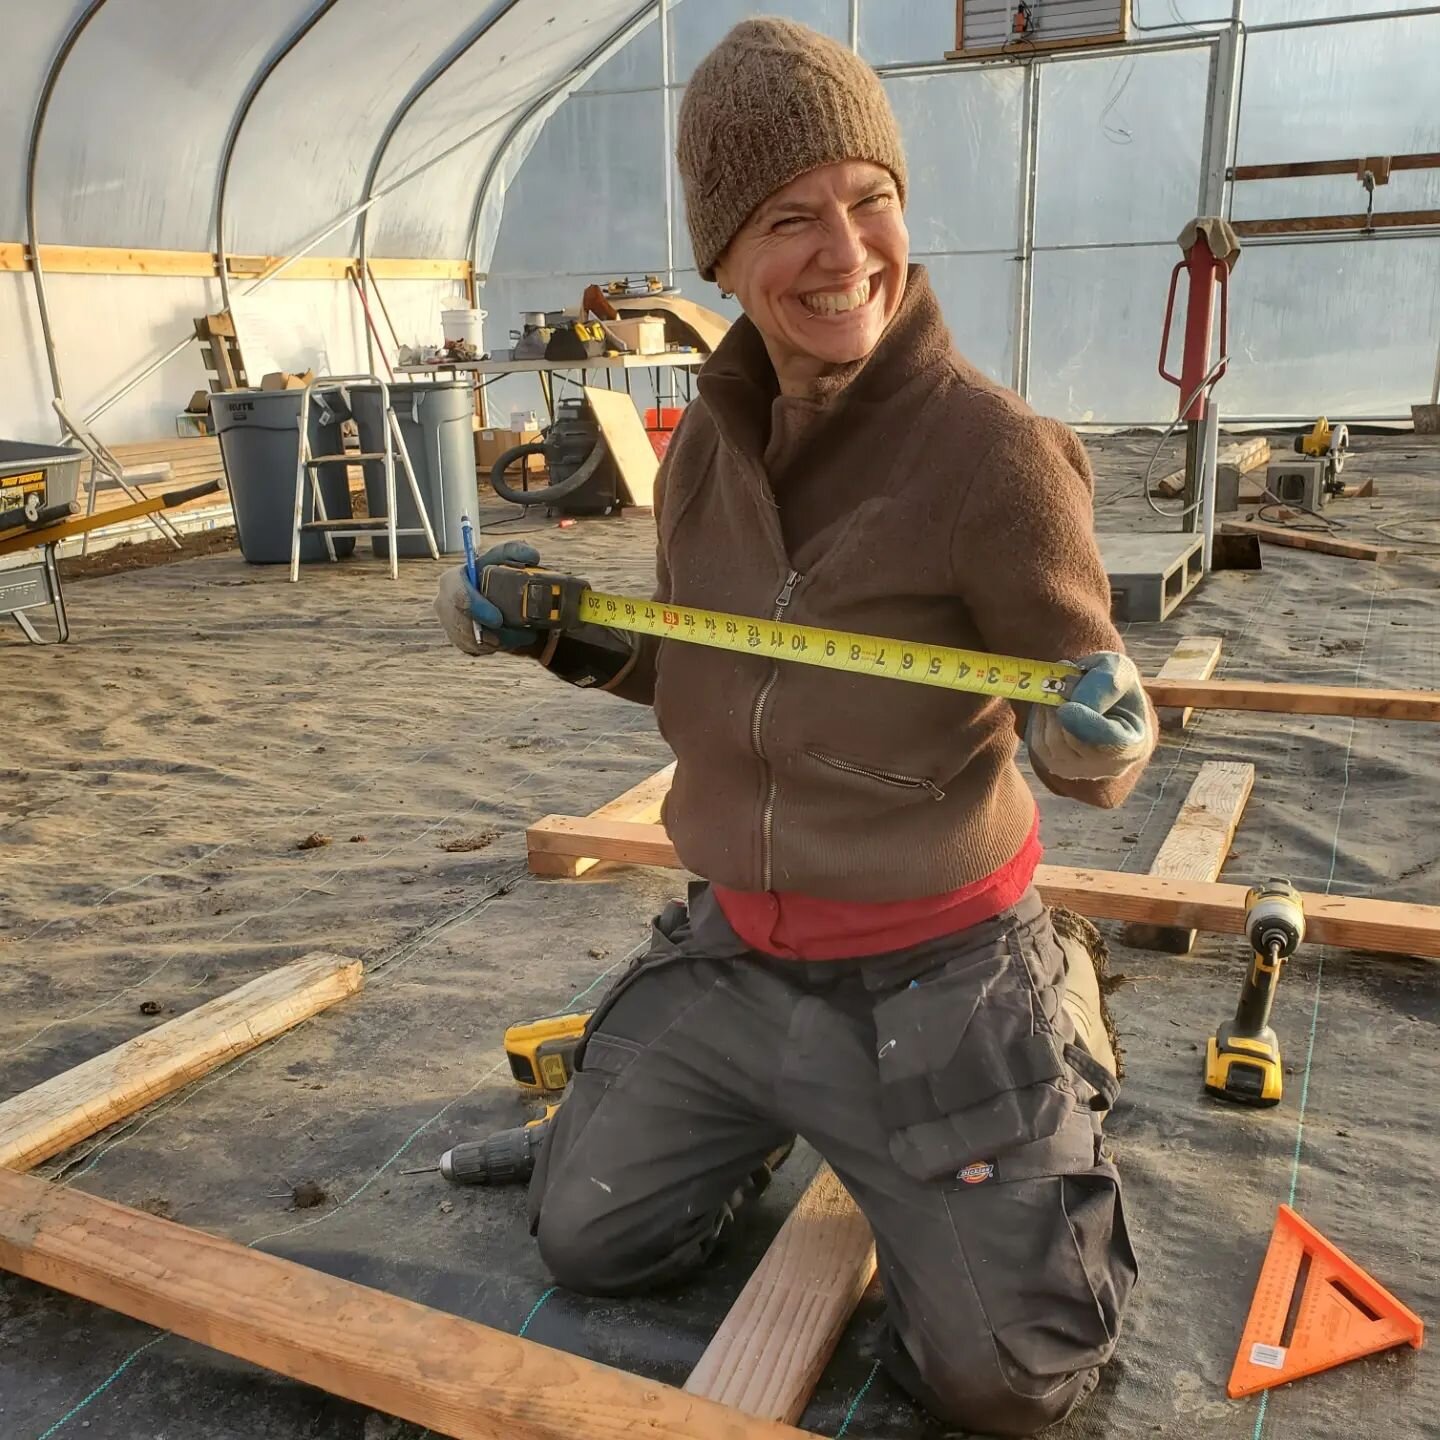 Meet Ali, the newest member of the Humming Bee team! This woman is such a powerhouse, unendingly creative and positive, and a delight to work with! She's a thoughtful builder, inventor, and plant steward and is already such an asset as we rebuild all